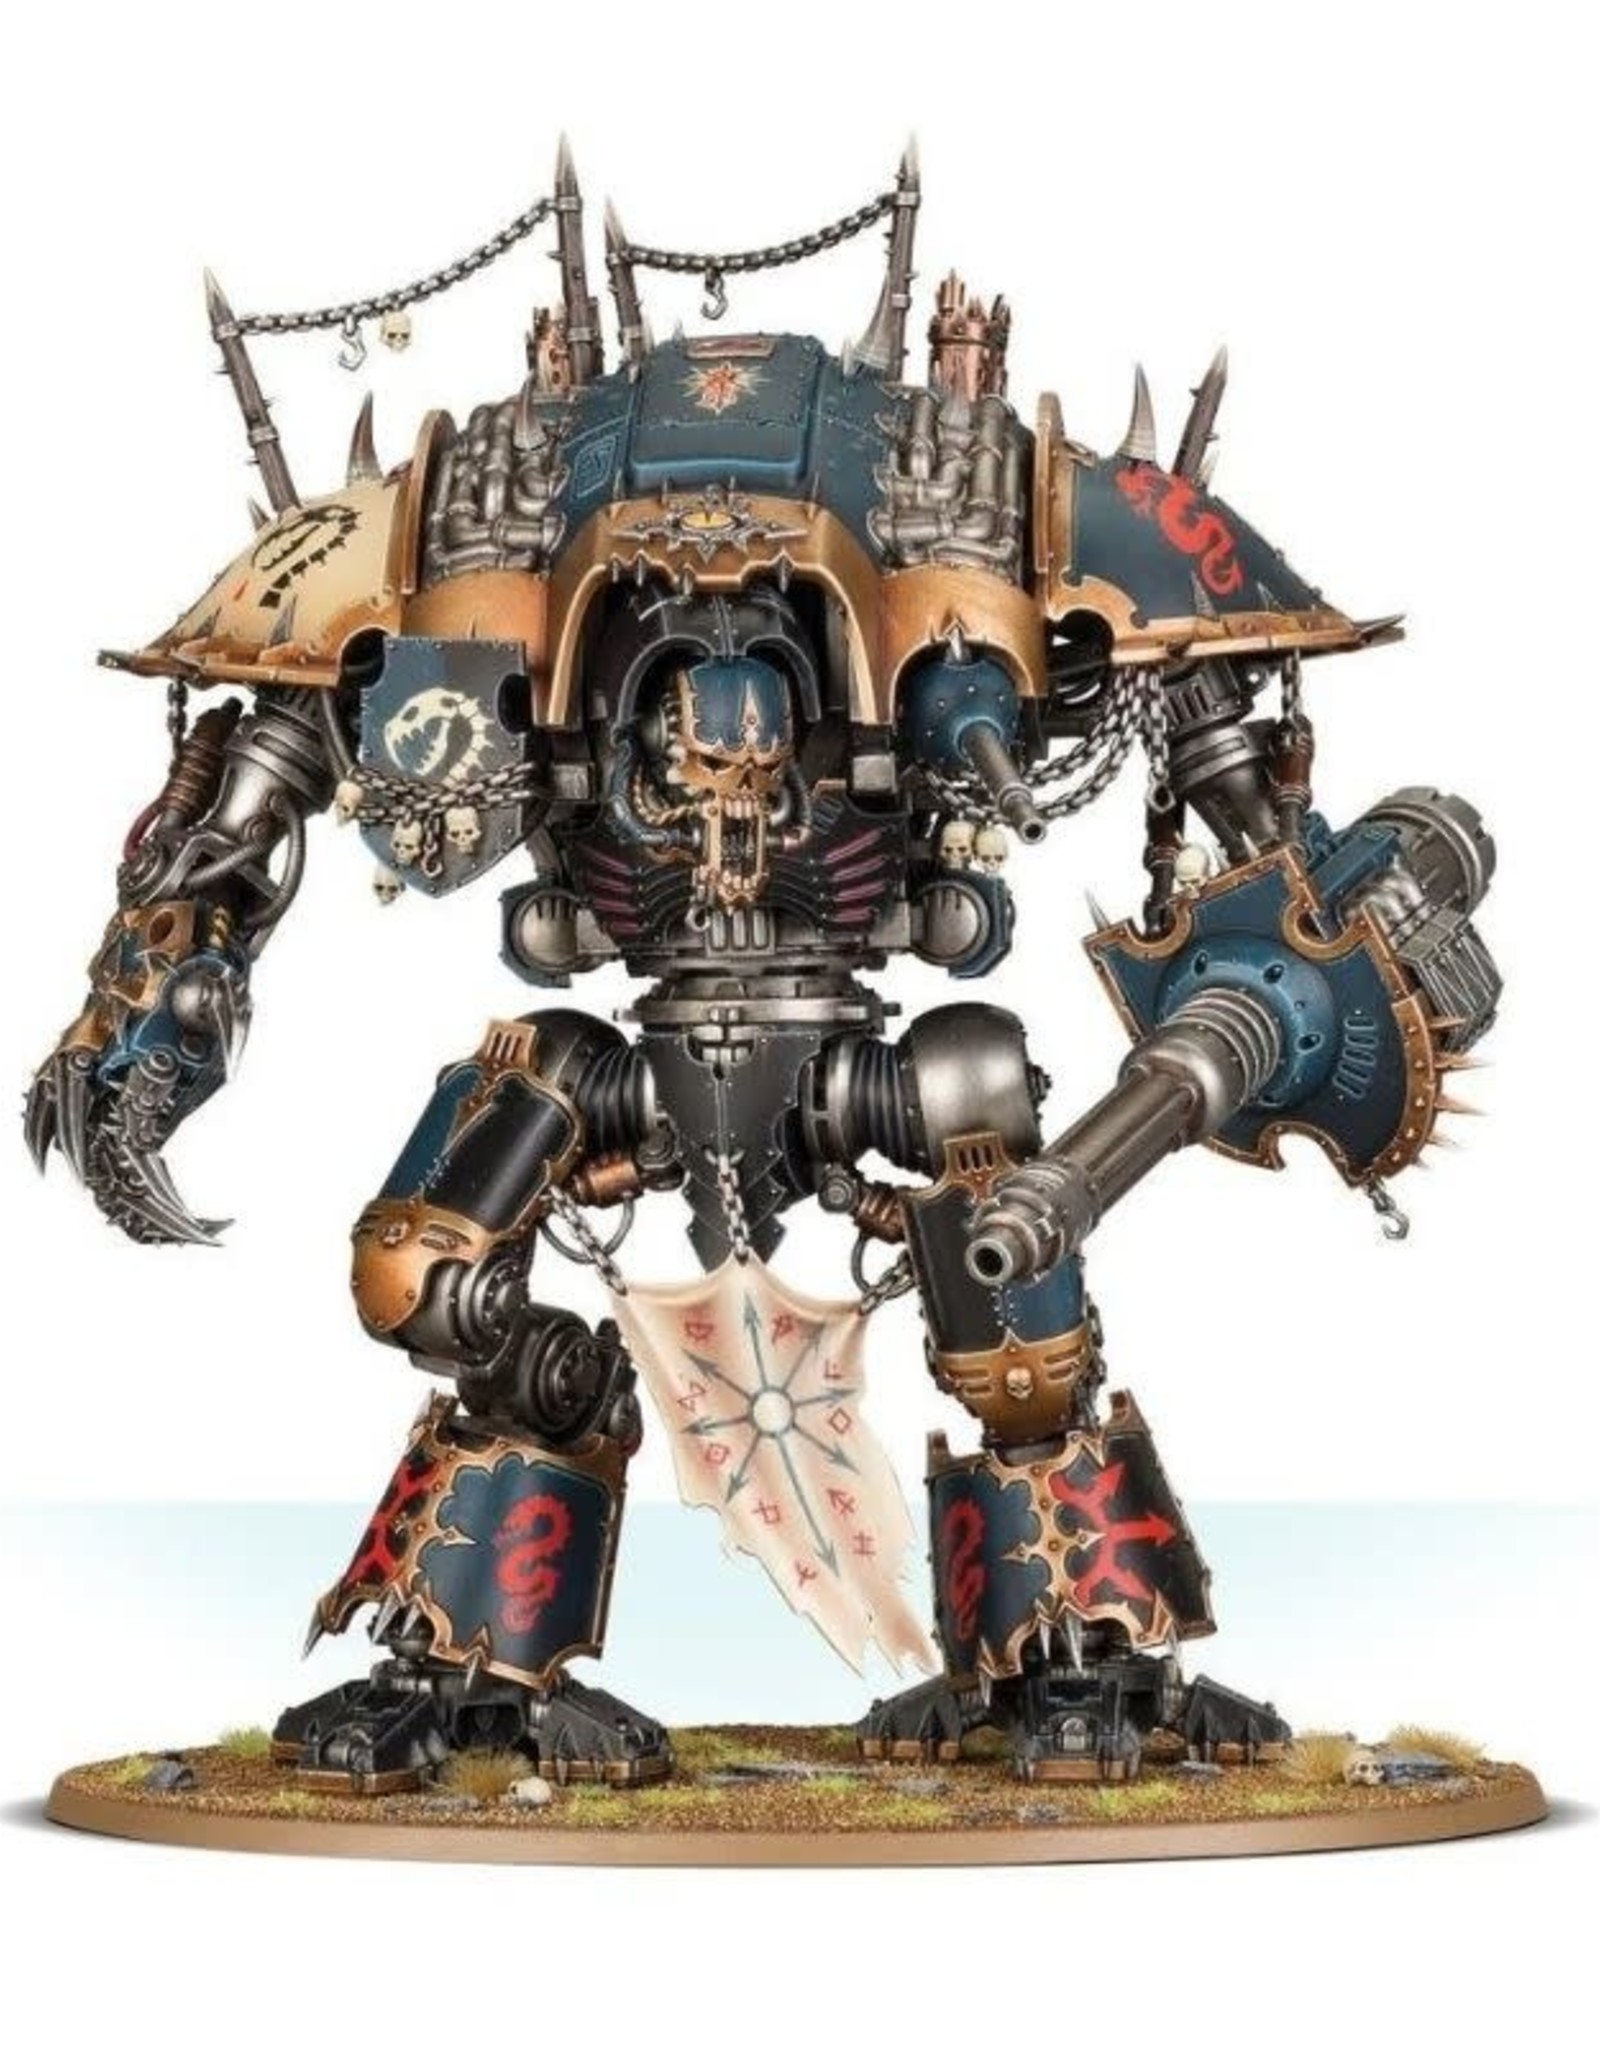 Games Workshop Chaos Knights: Knight Abominant